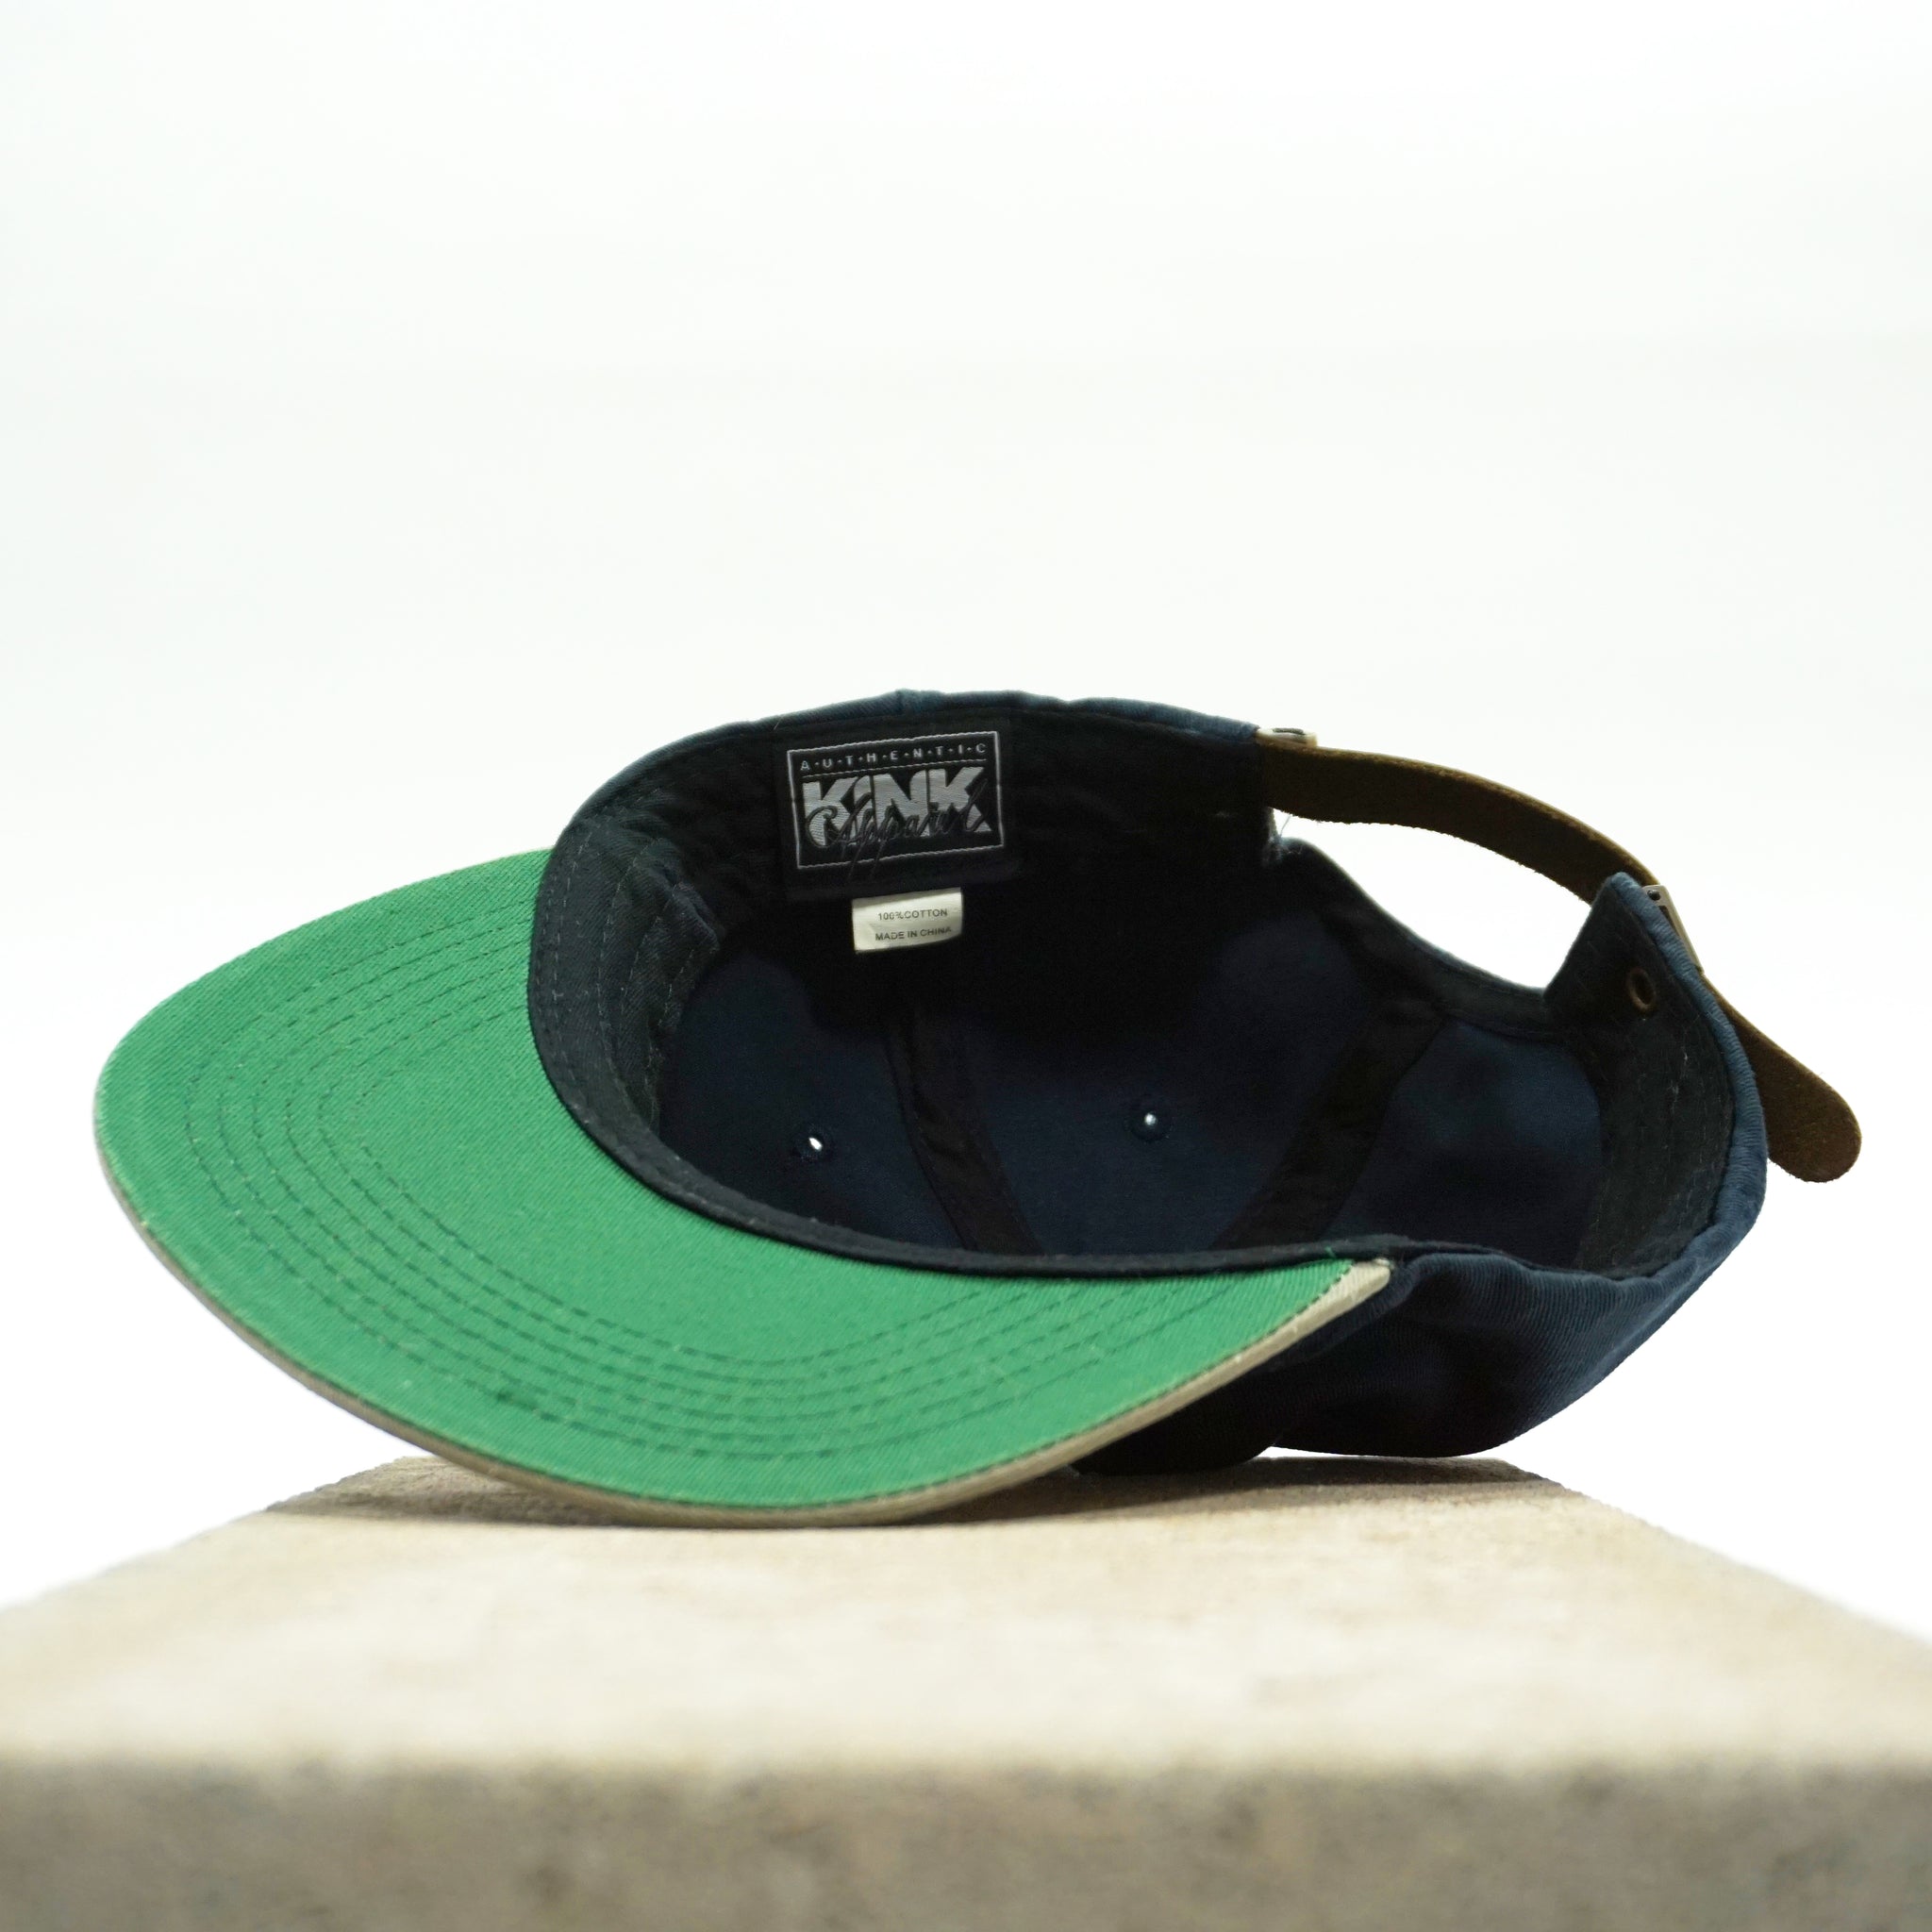 Kink - Unstructured Hat (Navy/Gray)